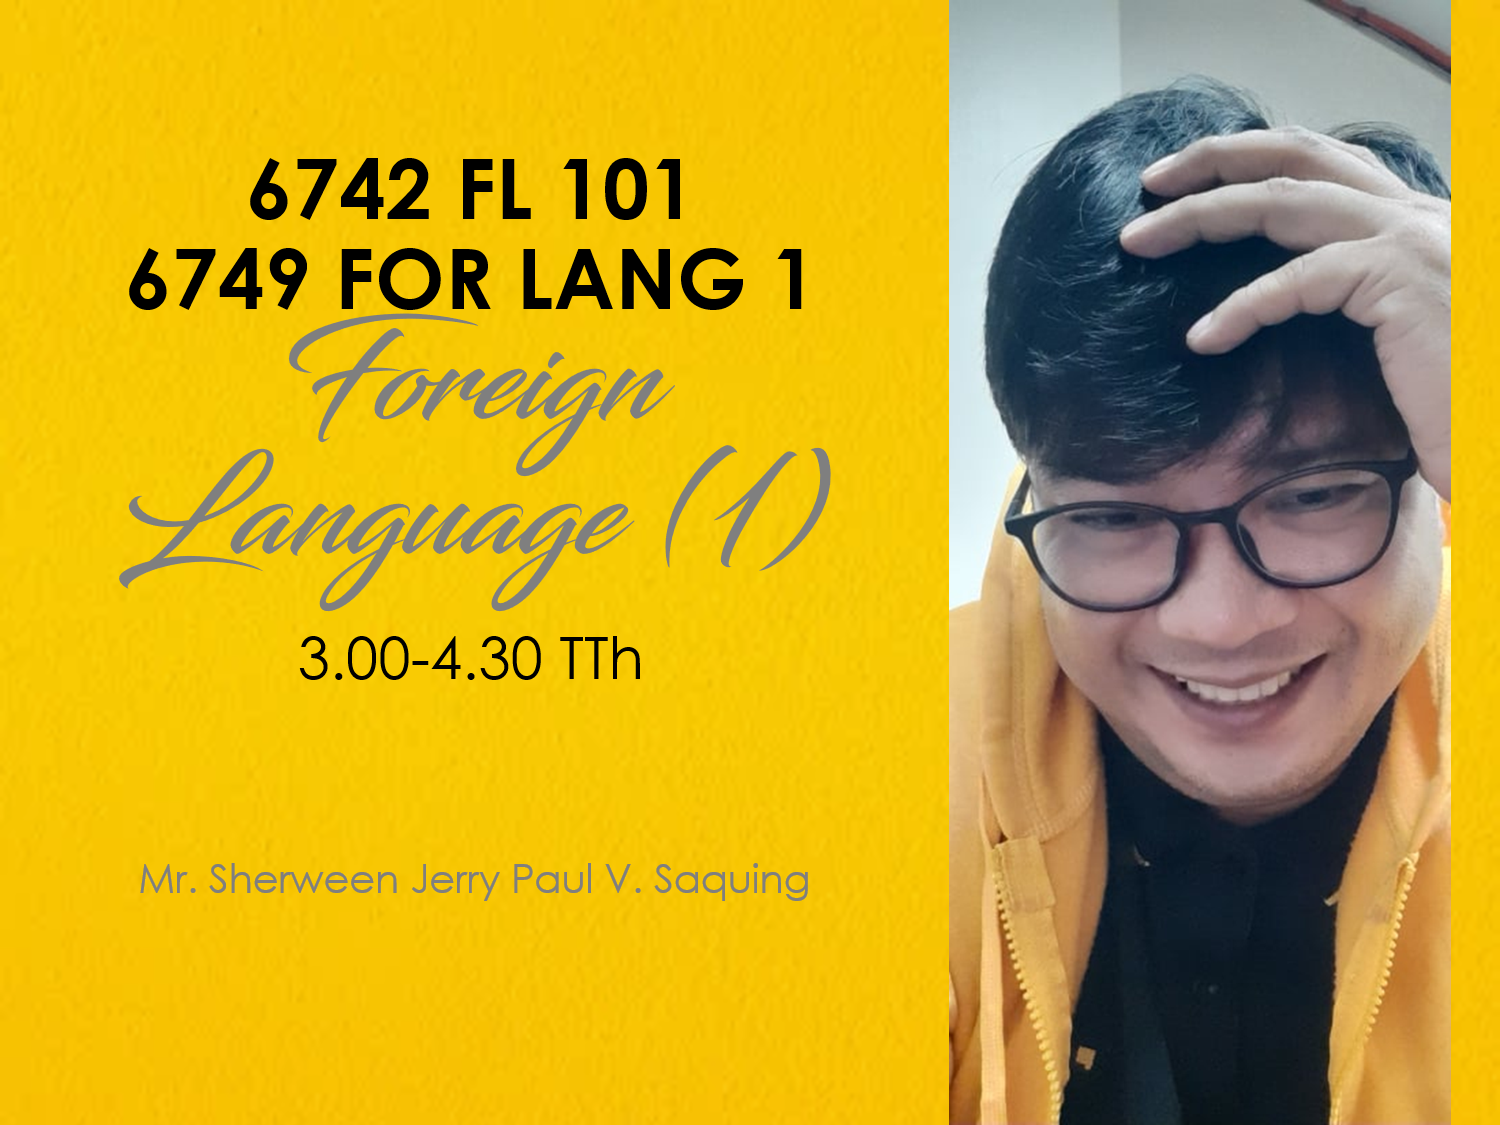 Foreign Language 1